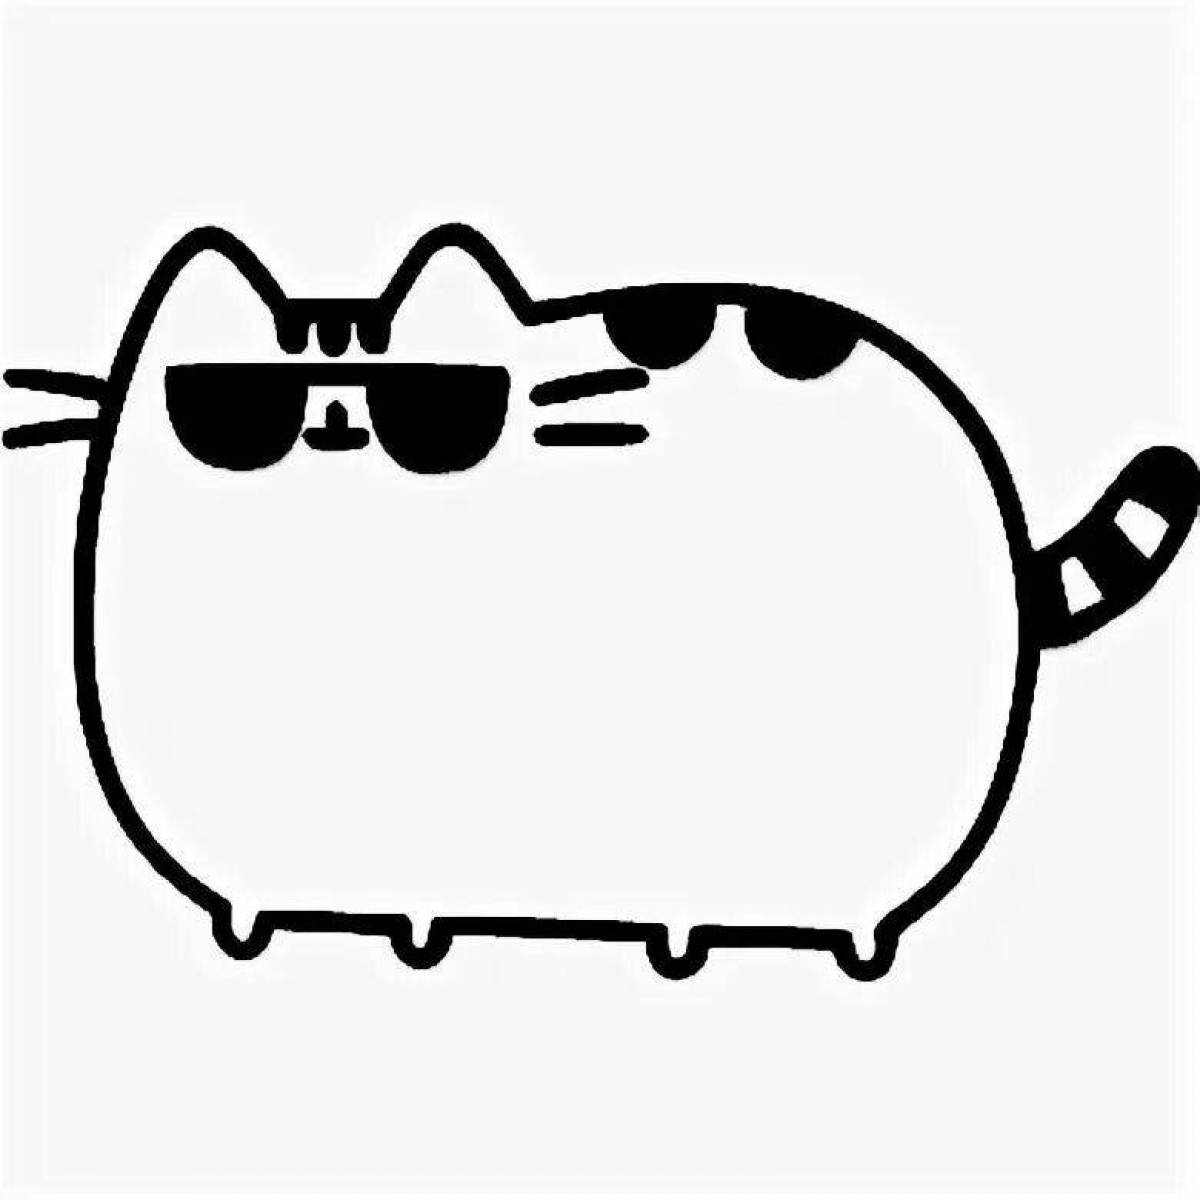 Snuggly fat cat coloring page